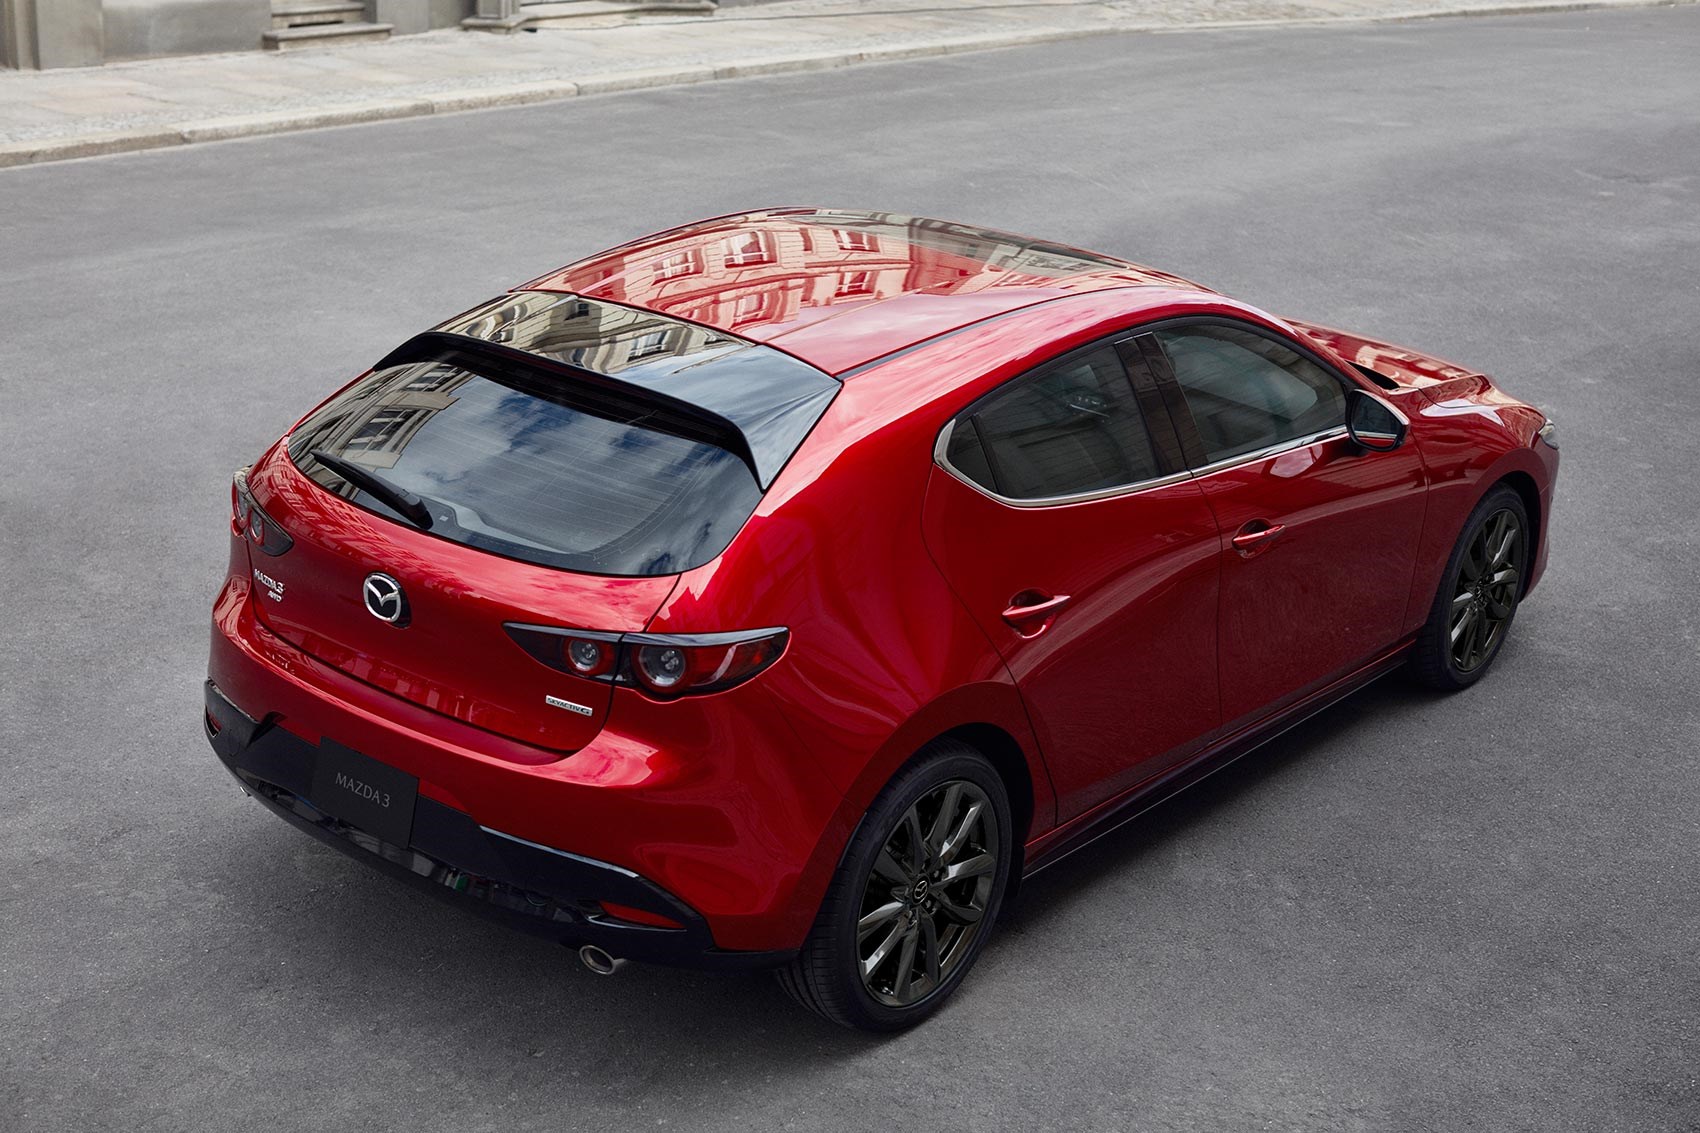 New 2019 Mazda 3 news and pictures CAR Magazine